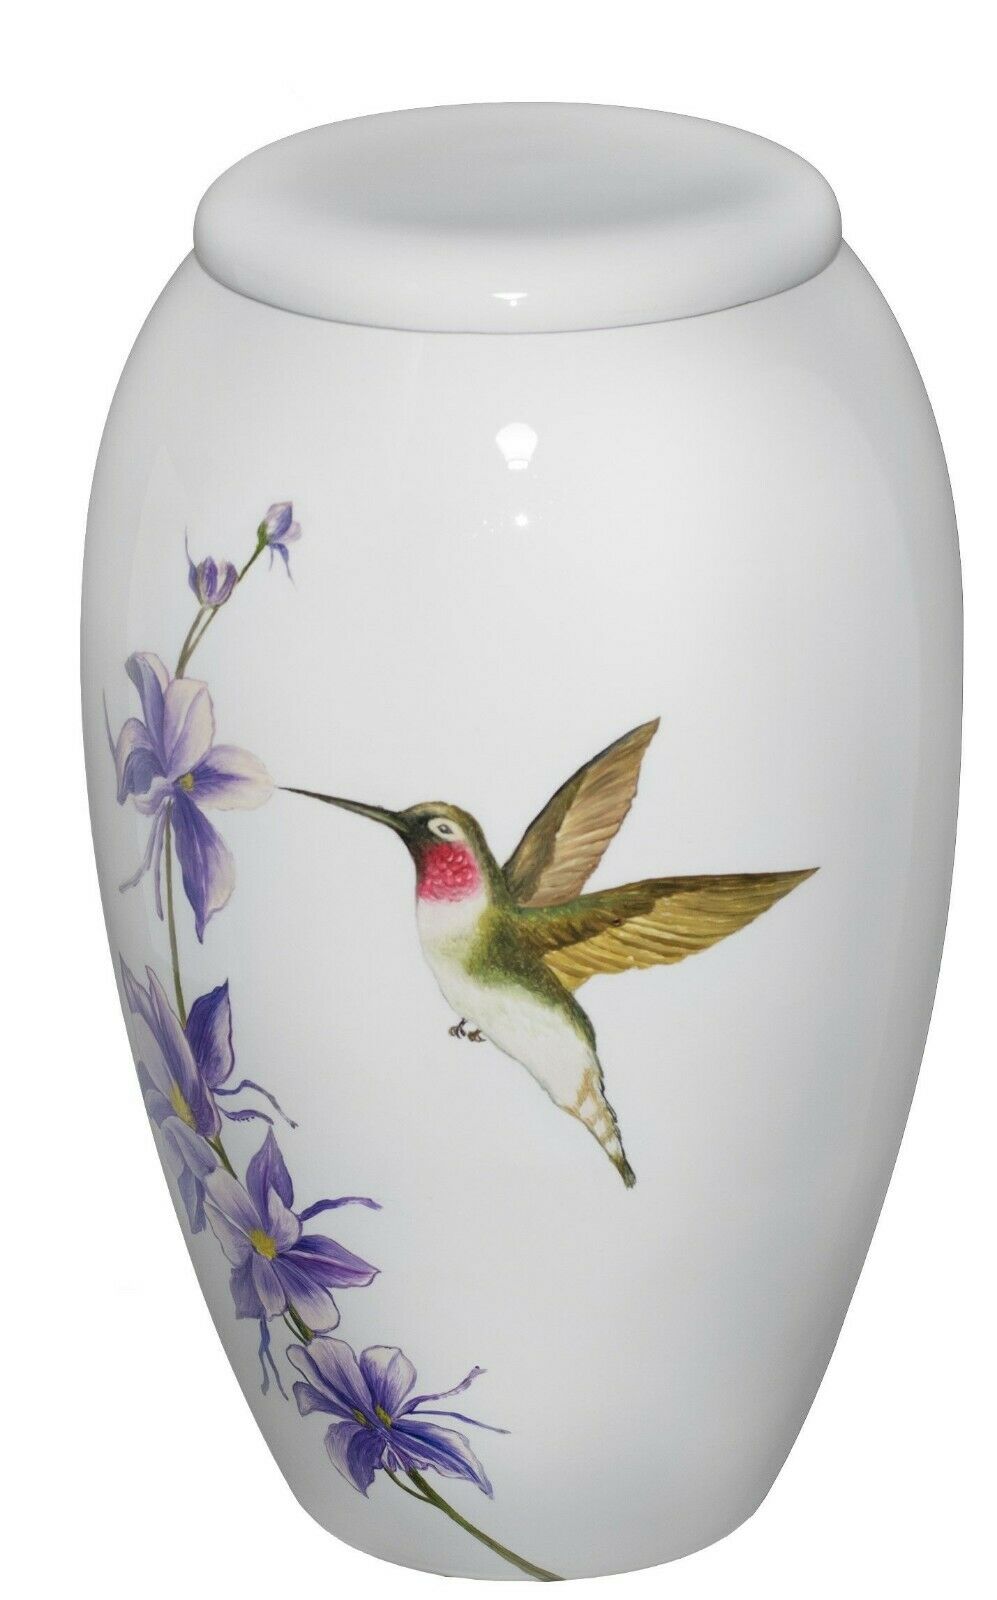 Hummingbird Delight 210 Cubic Inches Large/Adult Funeral Cremation Urn for Ashes